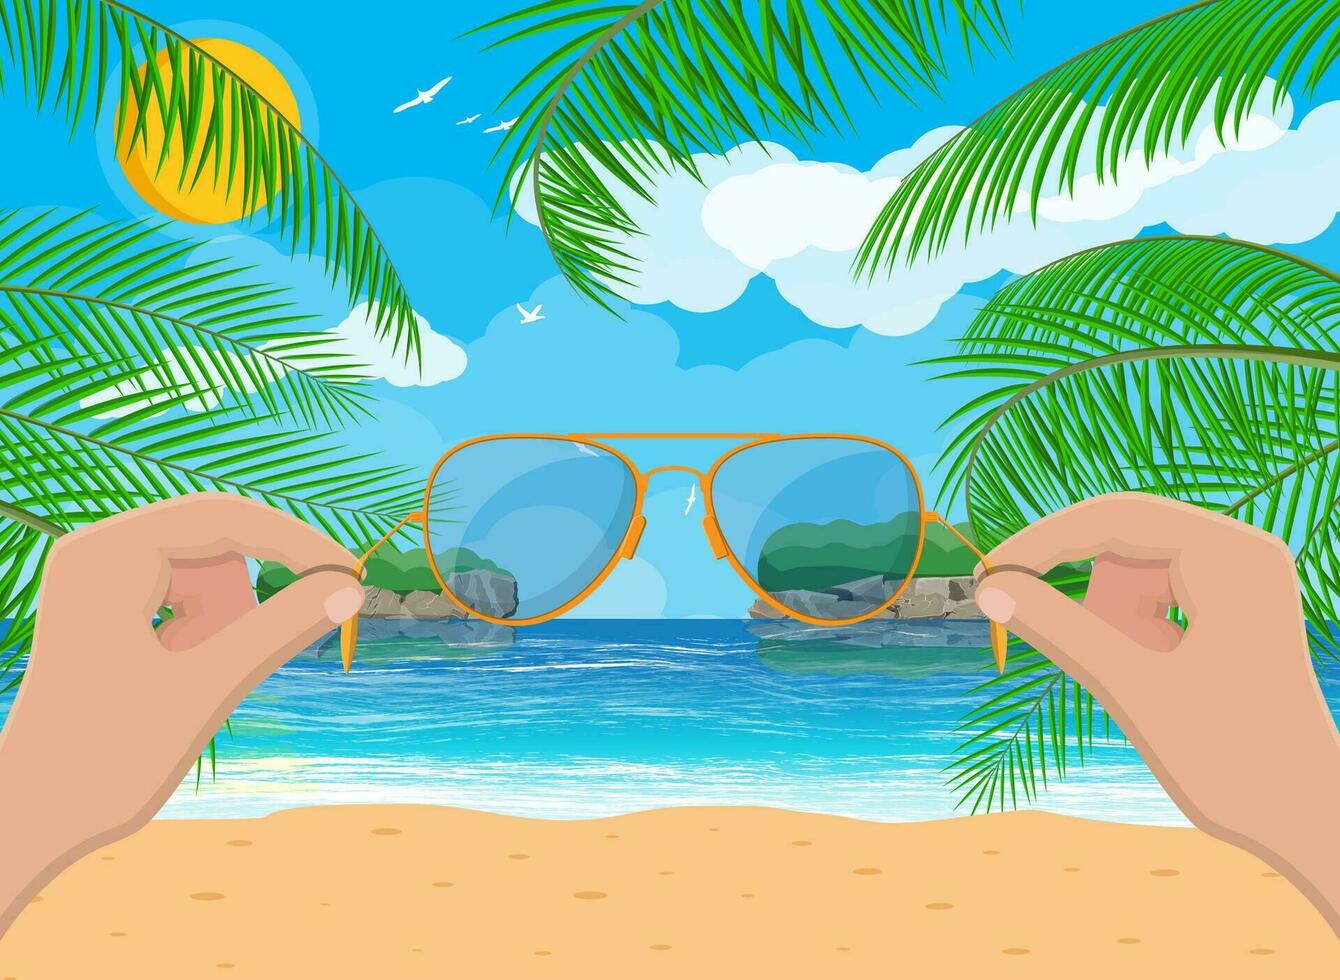 Hand with sunglasses. Landscape of palm tree on beach. Sun with reflection in water and clouds. Day in tropical place. Vector illustration in flat style